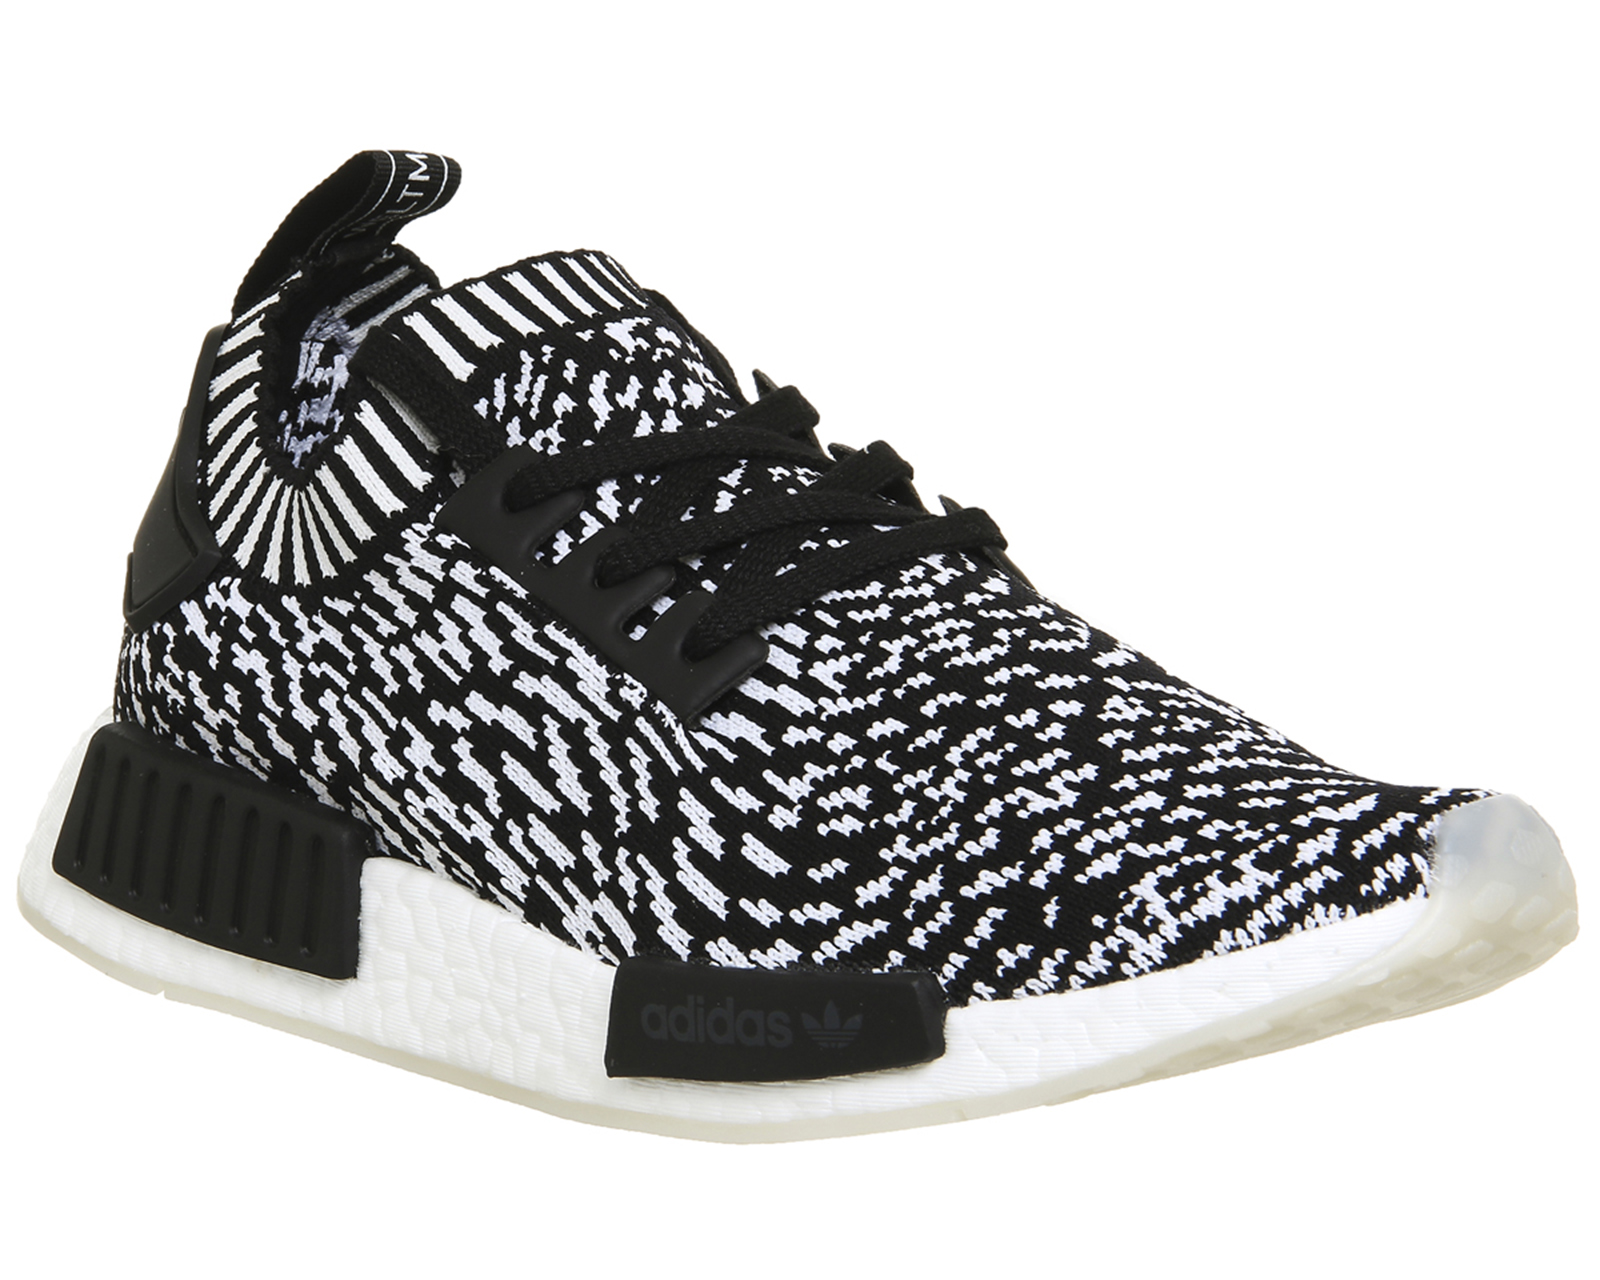 Purchase > adidas nmd xr1 knit, Up to 68% OFF